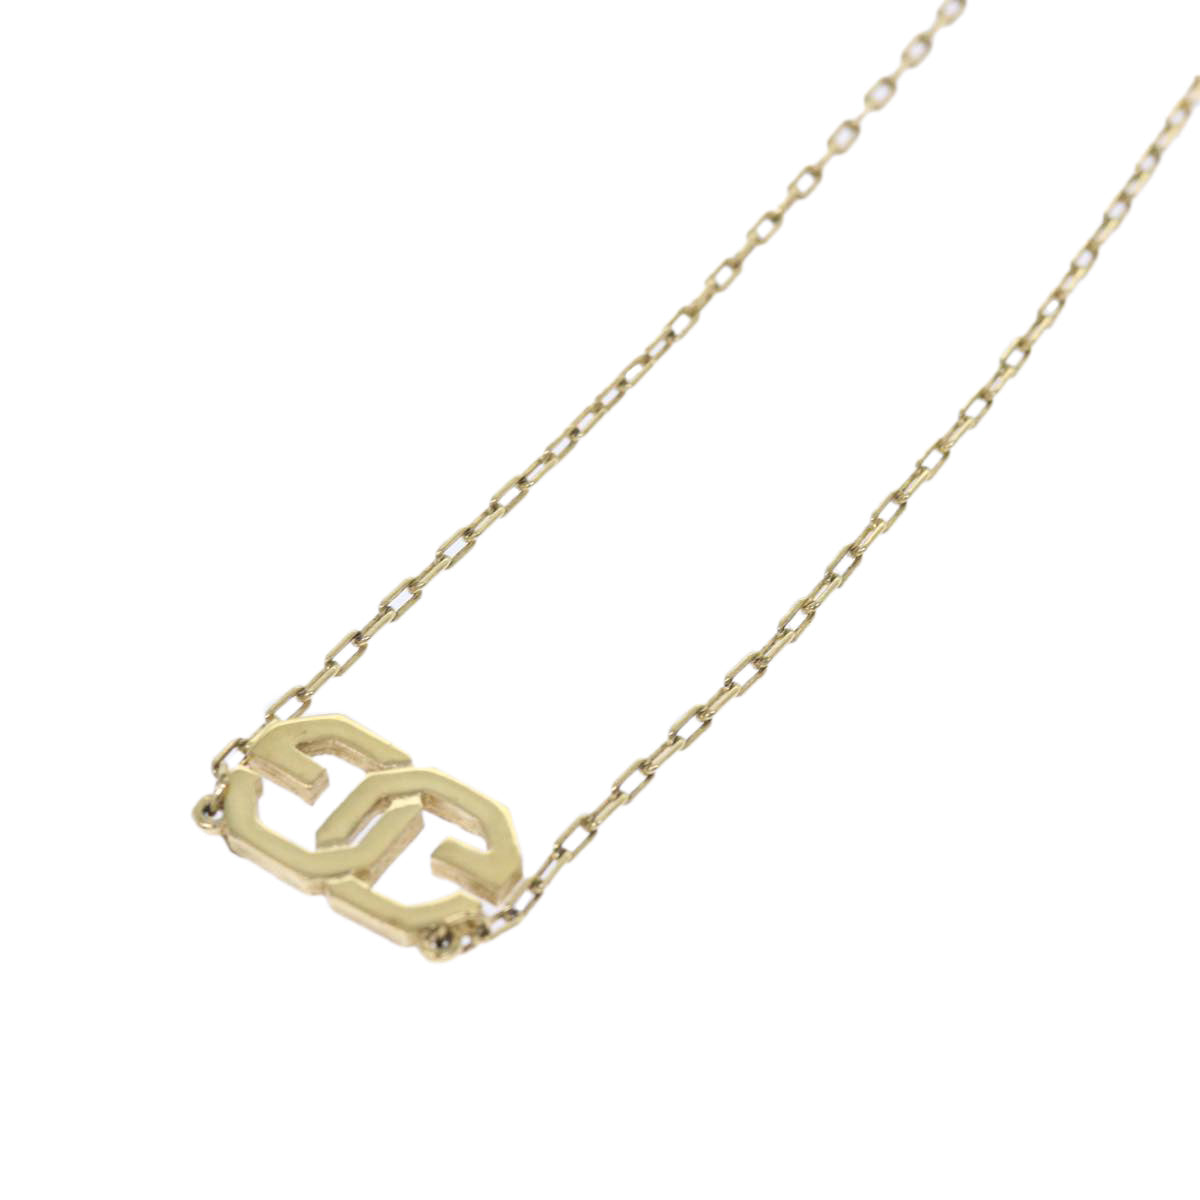 GIVENCHY Necklace Metal Gold Tone Auth am4866